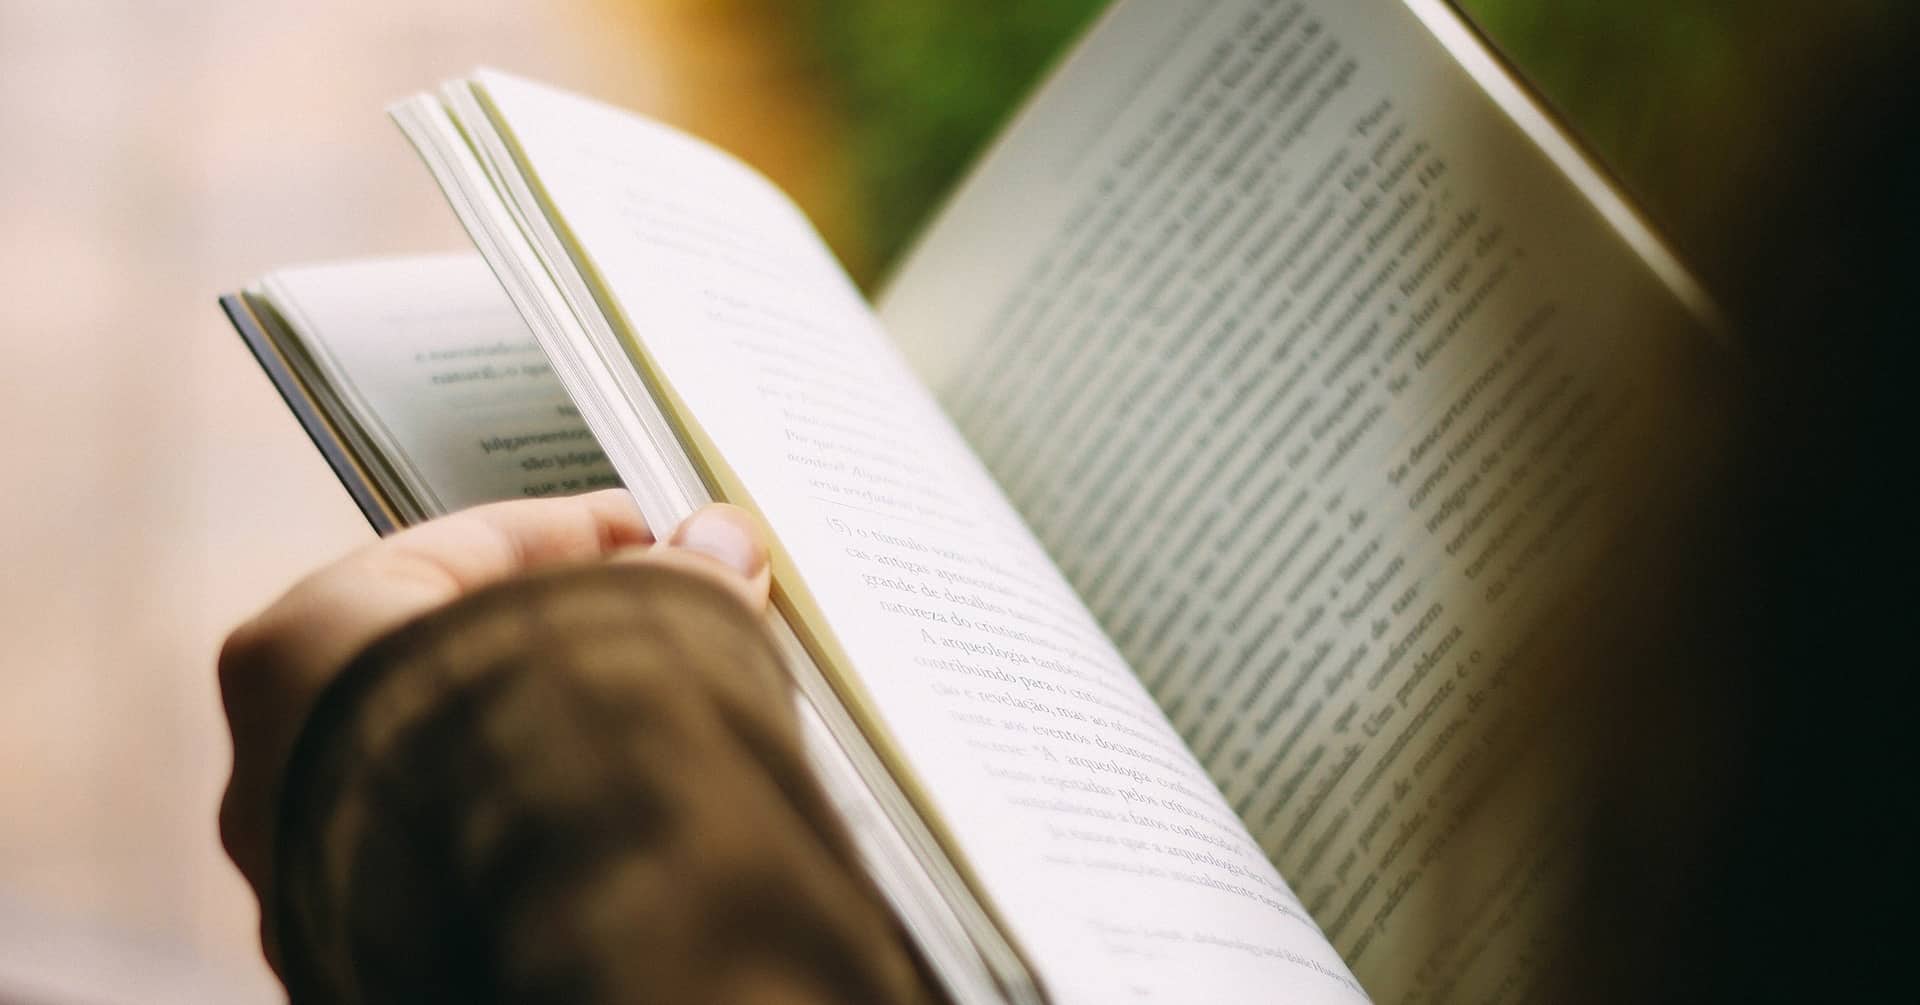 Books Everyone Should Read in Their 20s